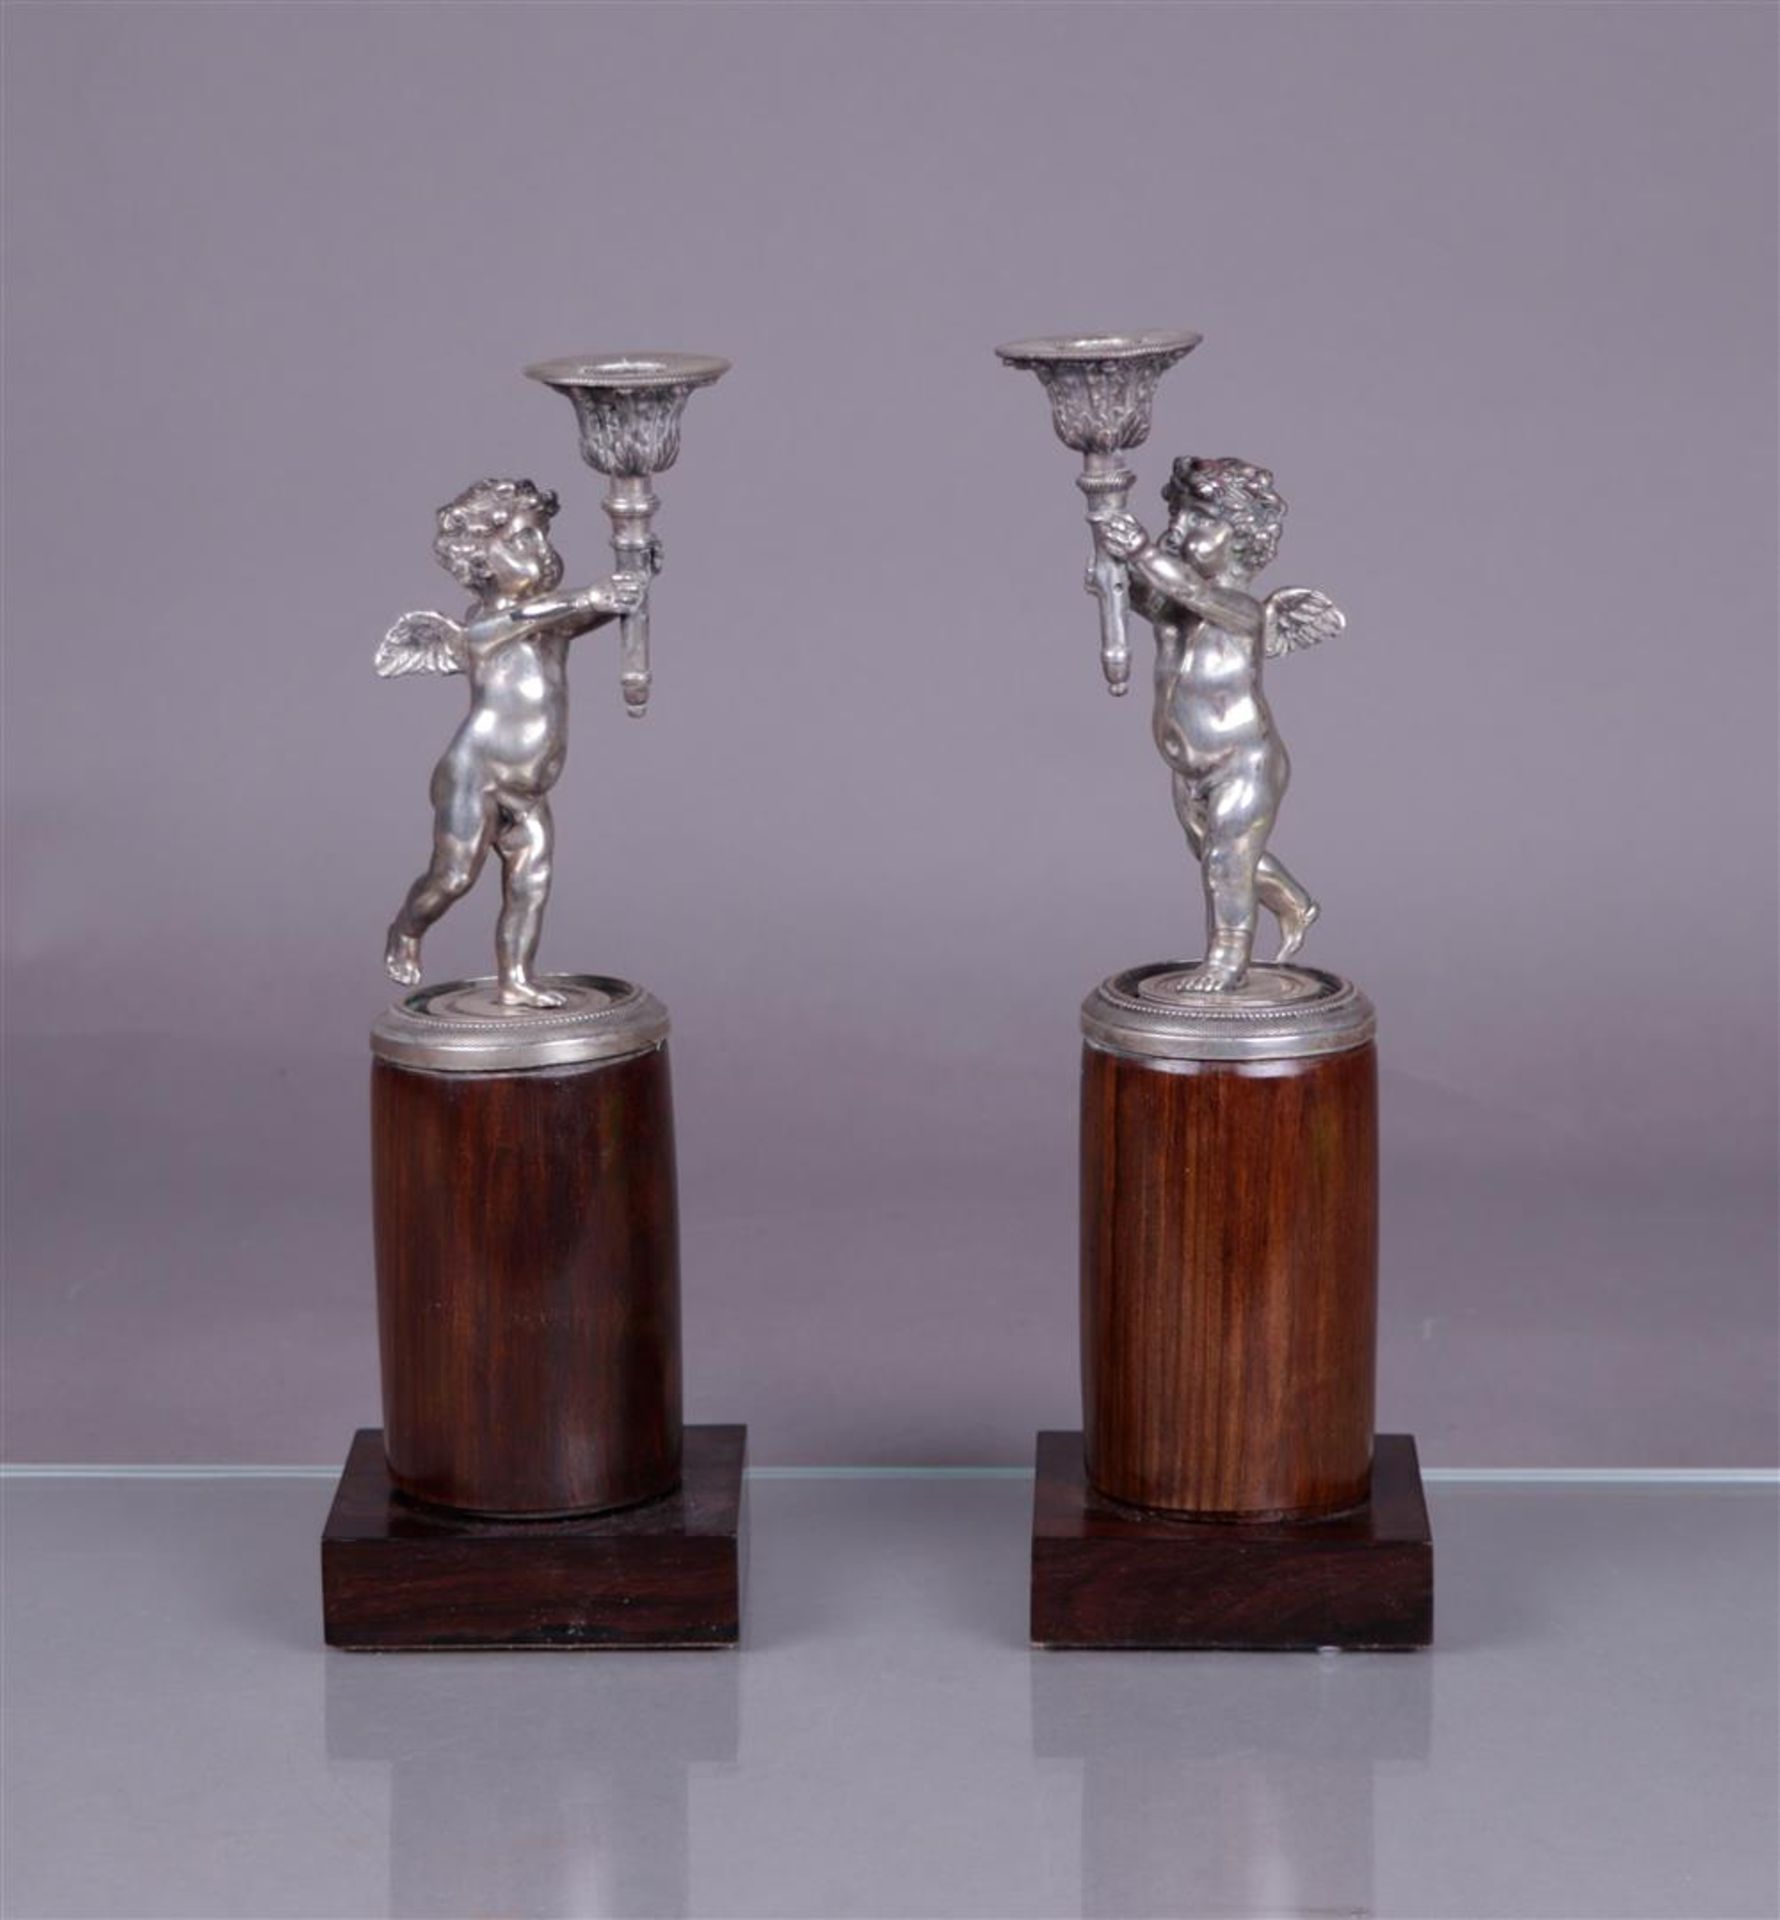 A pair of silver candlesticks in the shape of torch-bearing putti (BWG), mounted on a polished woode